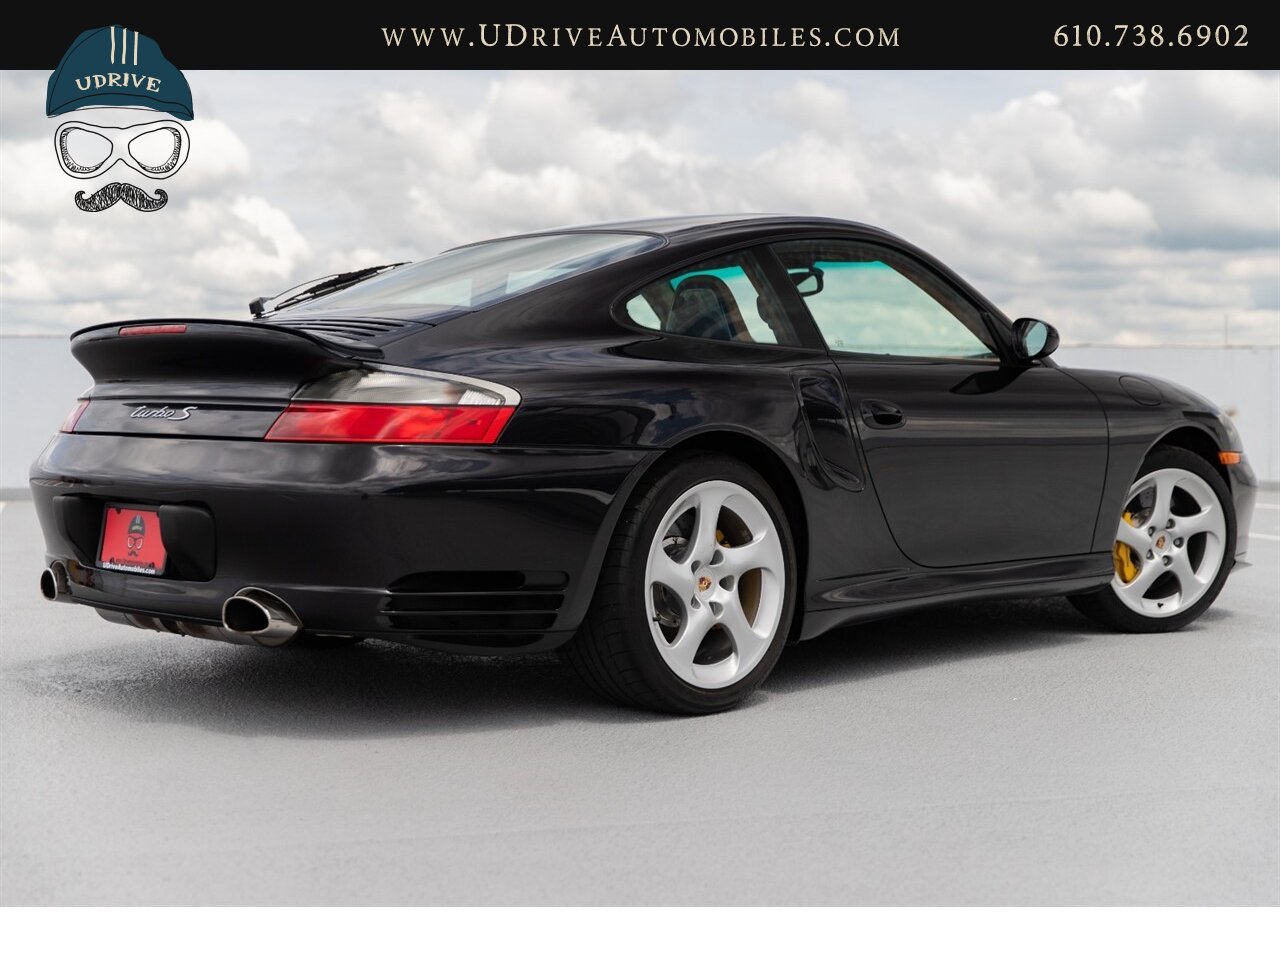 2005 Porsche 911 Turbo S 6 Speed 14k Miles Sport Sts Painted Backs  Natural Brown Lthr $144,070 MSRP - Photo 3 - West Chester, PA 19382